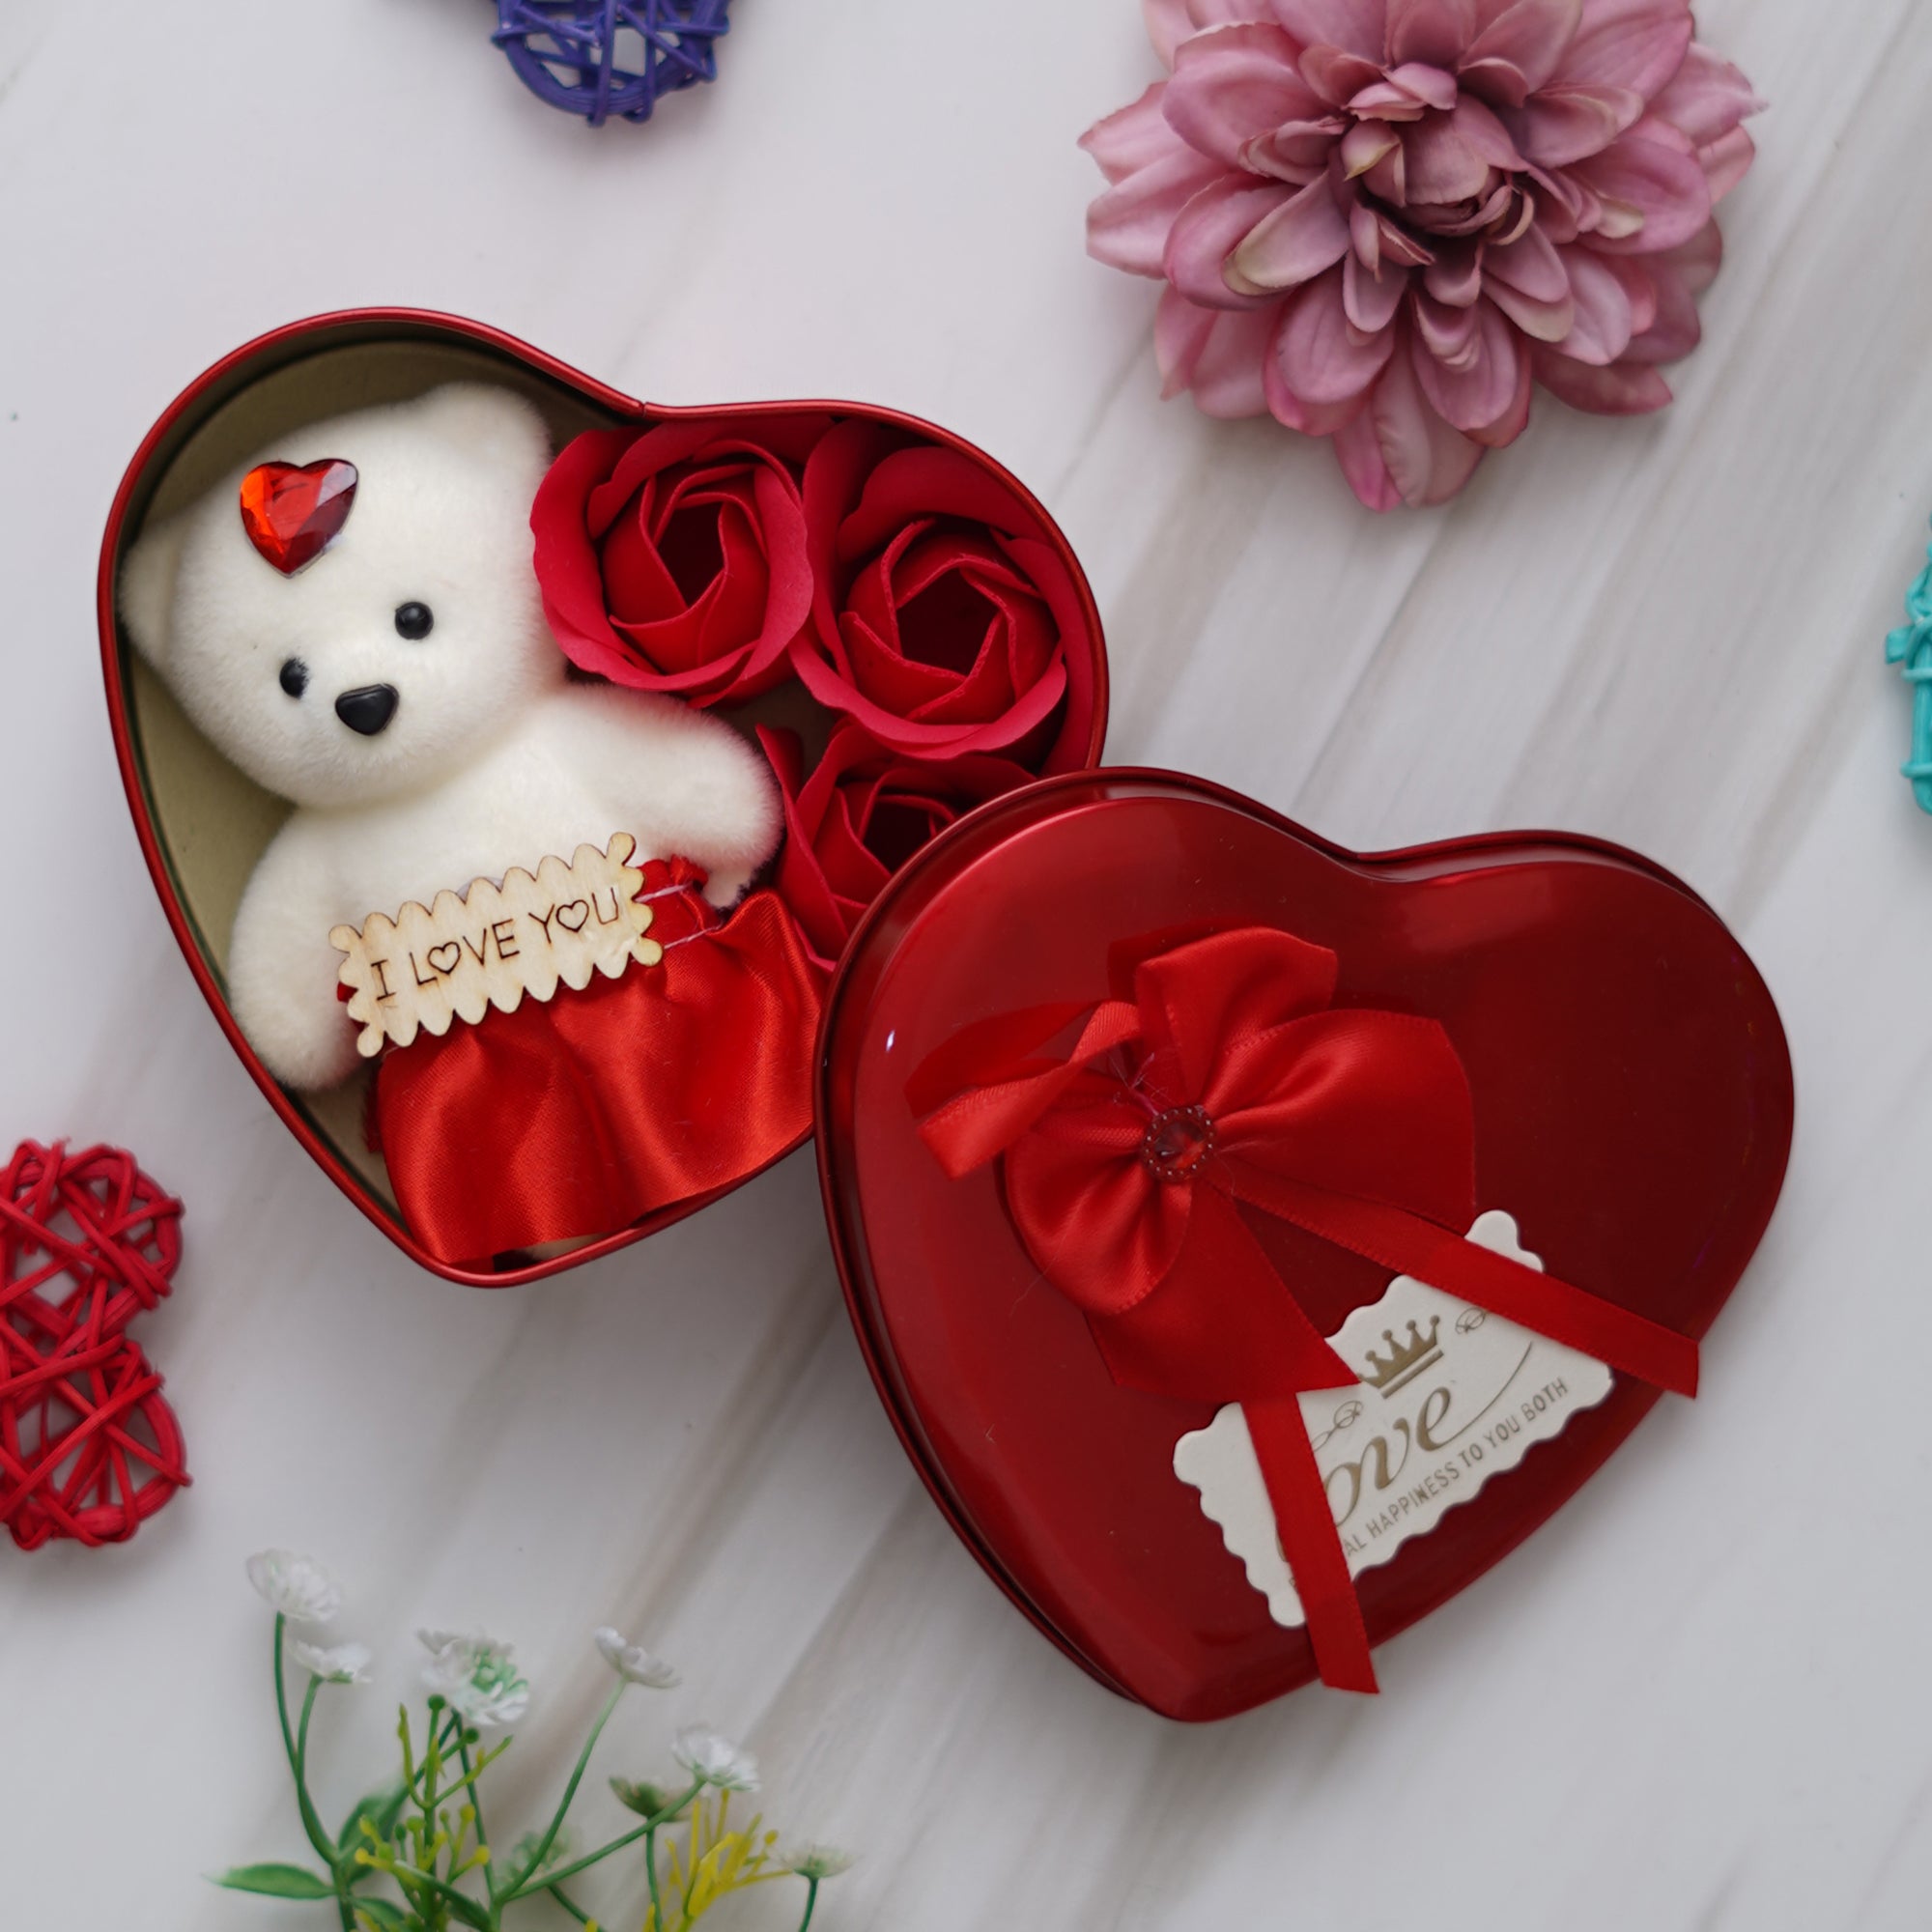 Valentine Combo of Card, Heart Shaped Gift Box Set with White Teddy and Red Roses, "Things I Love About You" Puzzle Wooden Gift Set 3